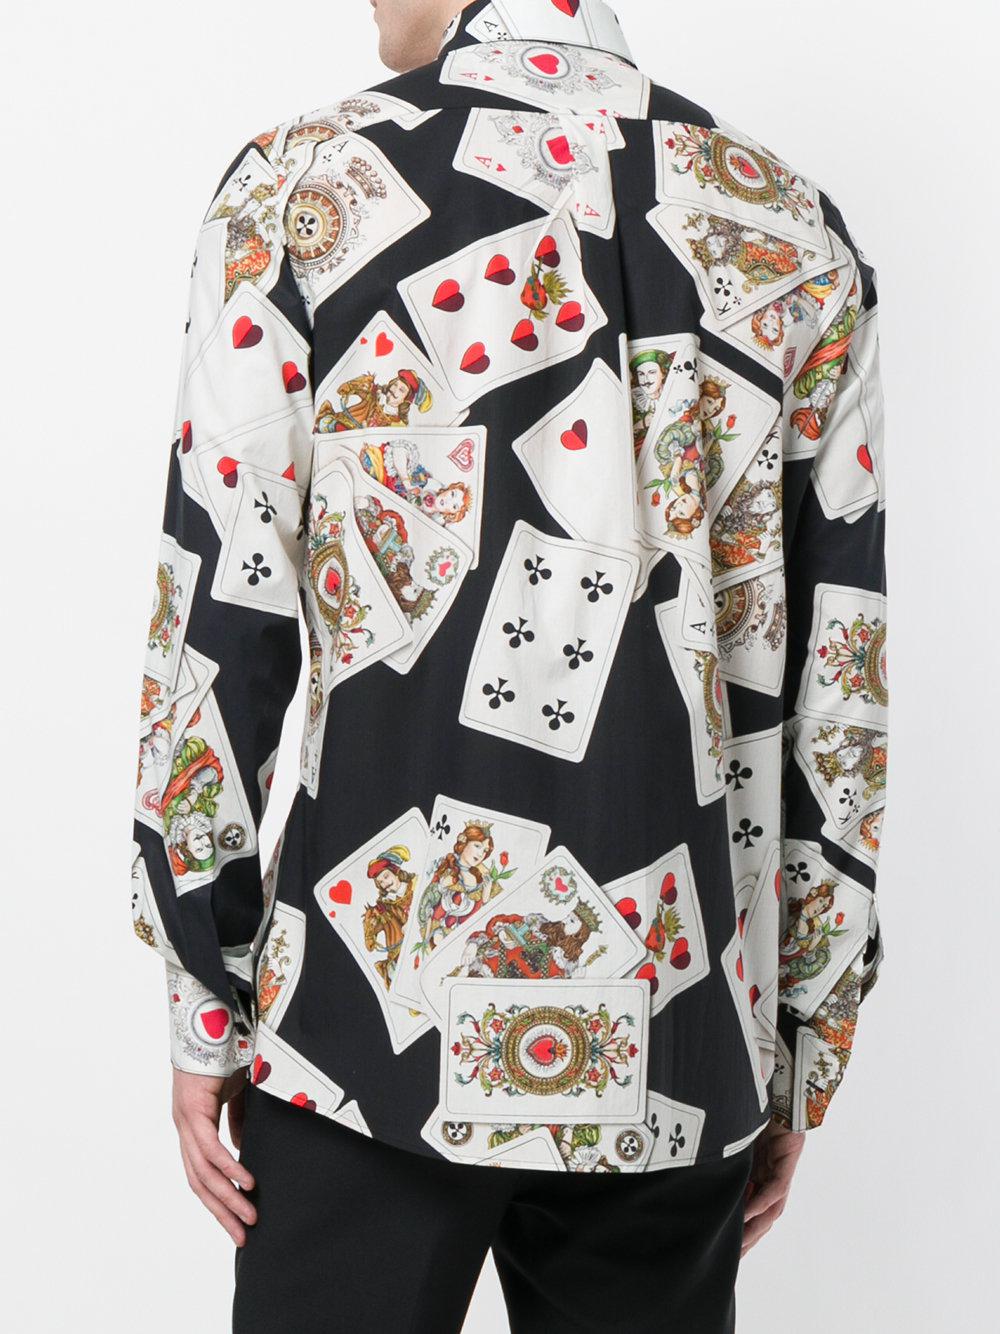 Dolce & Gabbana Cotton Playing Cards Print Shirt in Black for Men - Lyst